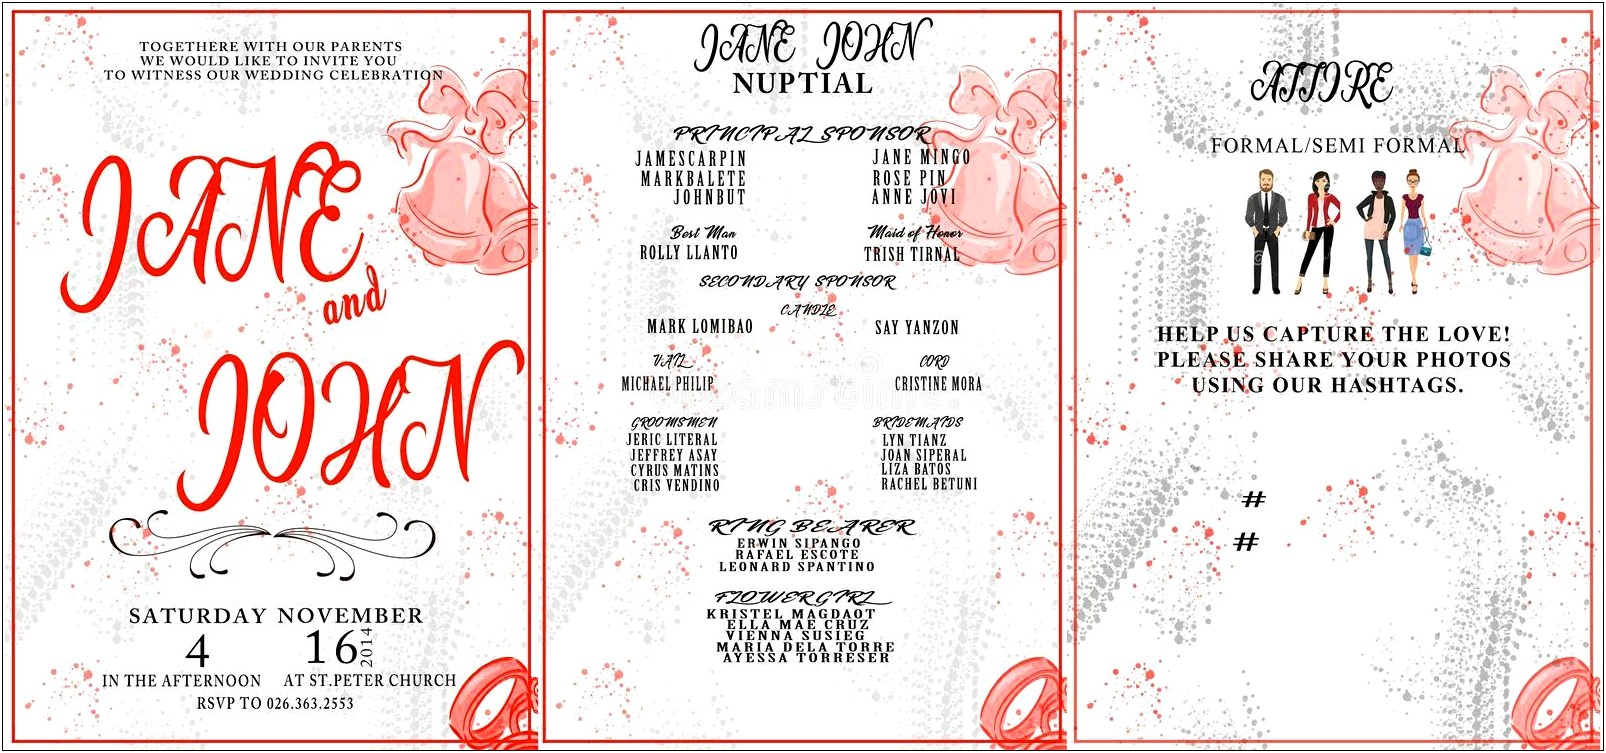 Example Wedding Invitations With Dress Code